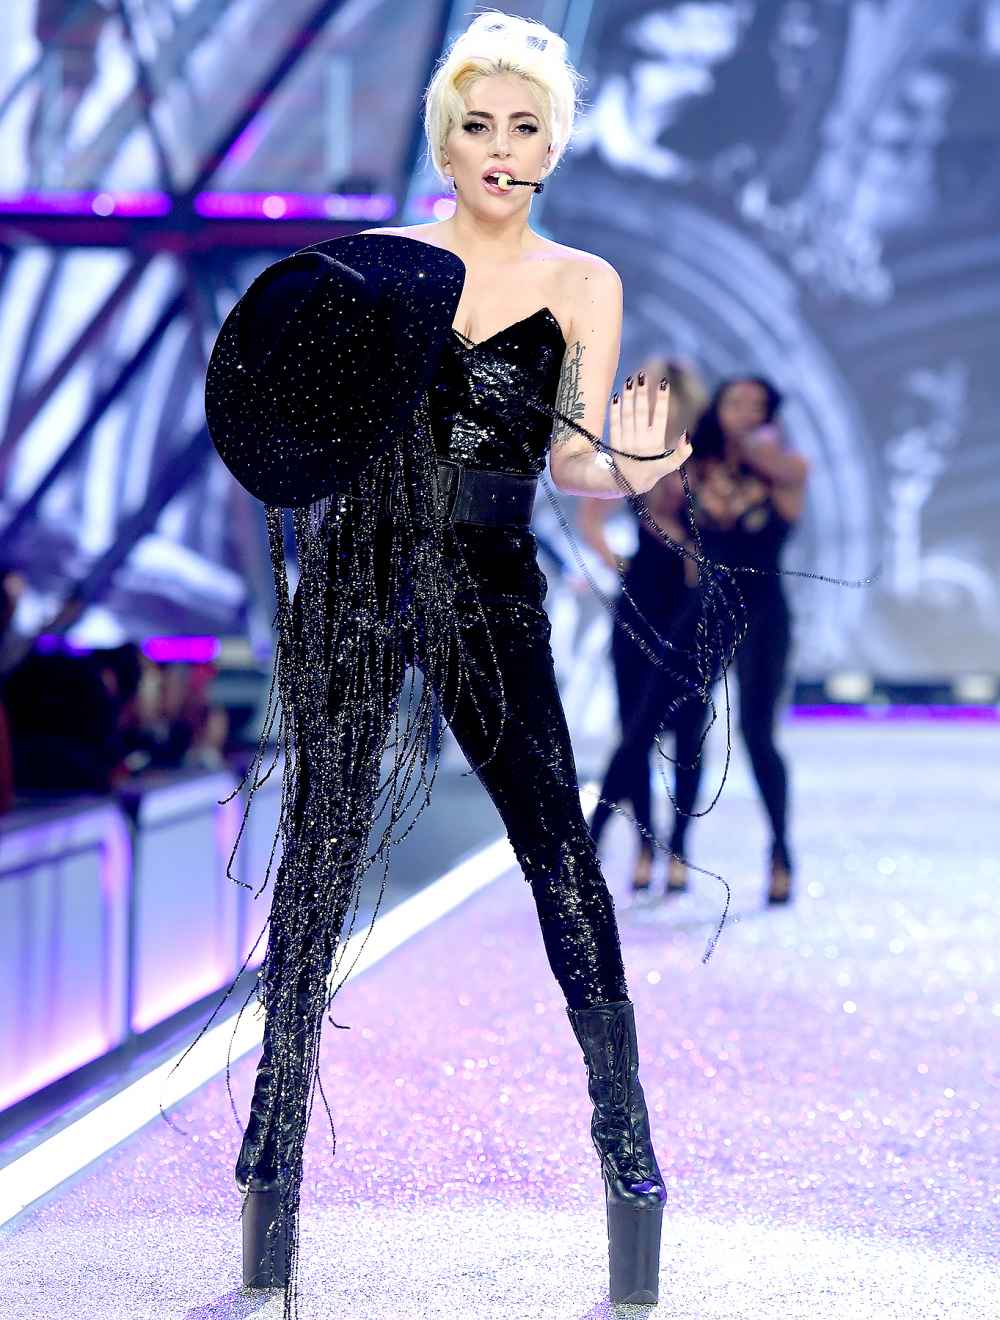 Lady Gaga sings the runway during the 2016 Victoria's Secret Fashion Show on November 30, 2016 in Paris, France.